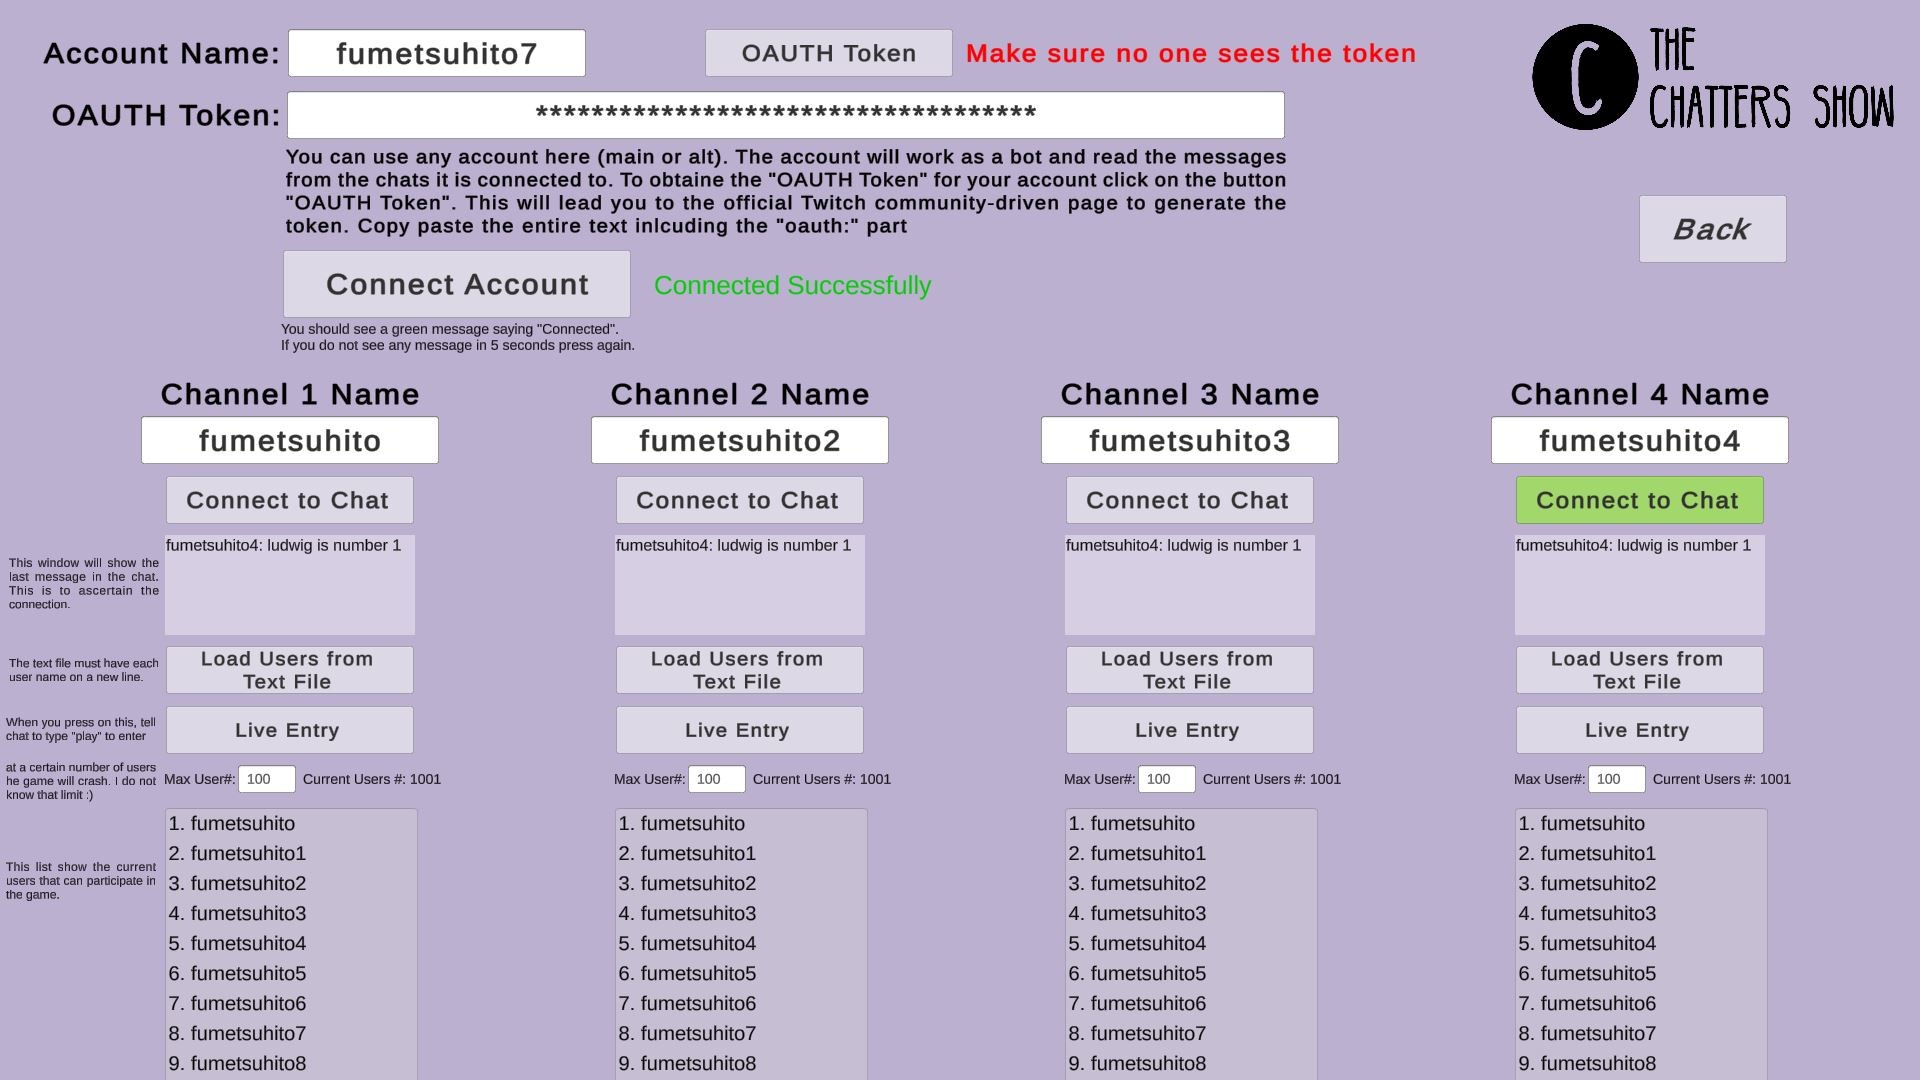 The Chatters Show screenshot